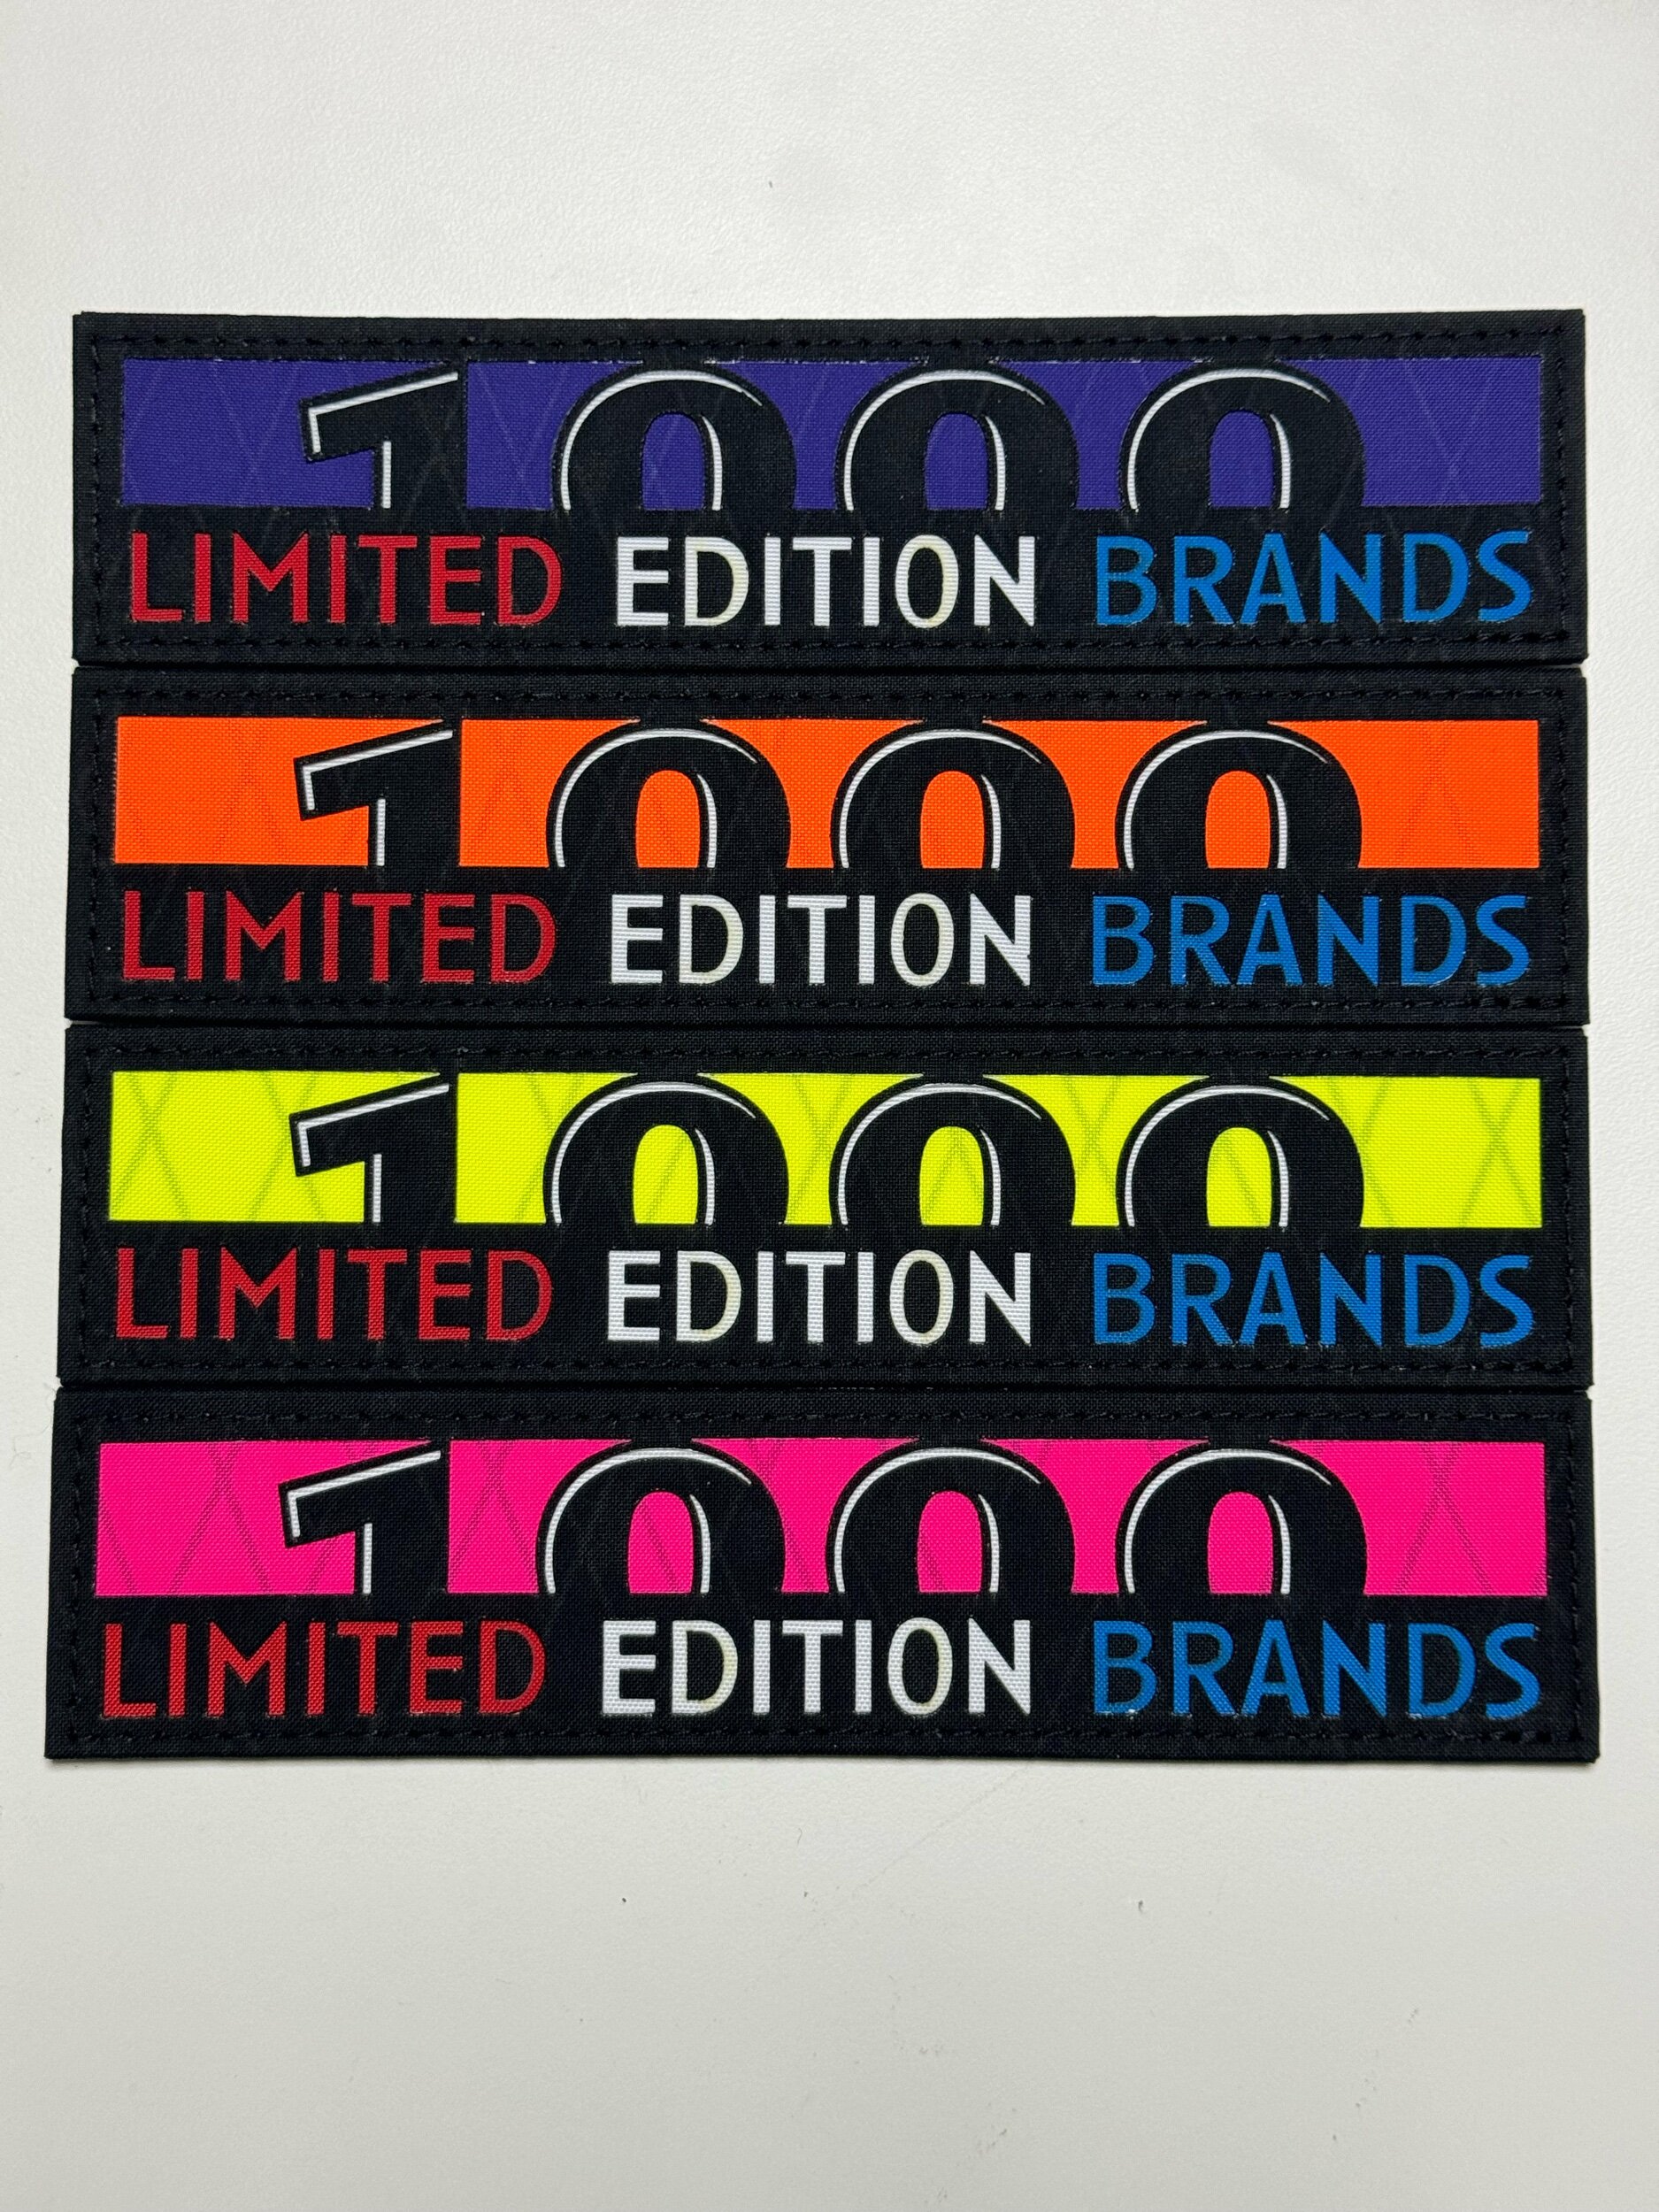 Limited Edition Brands